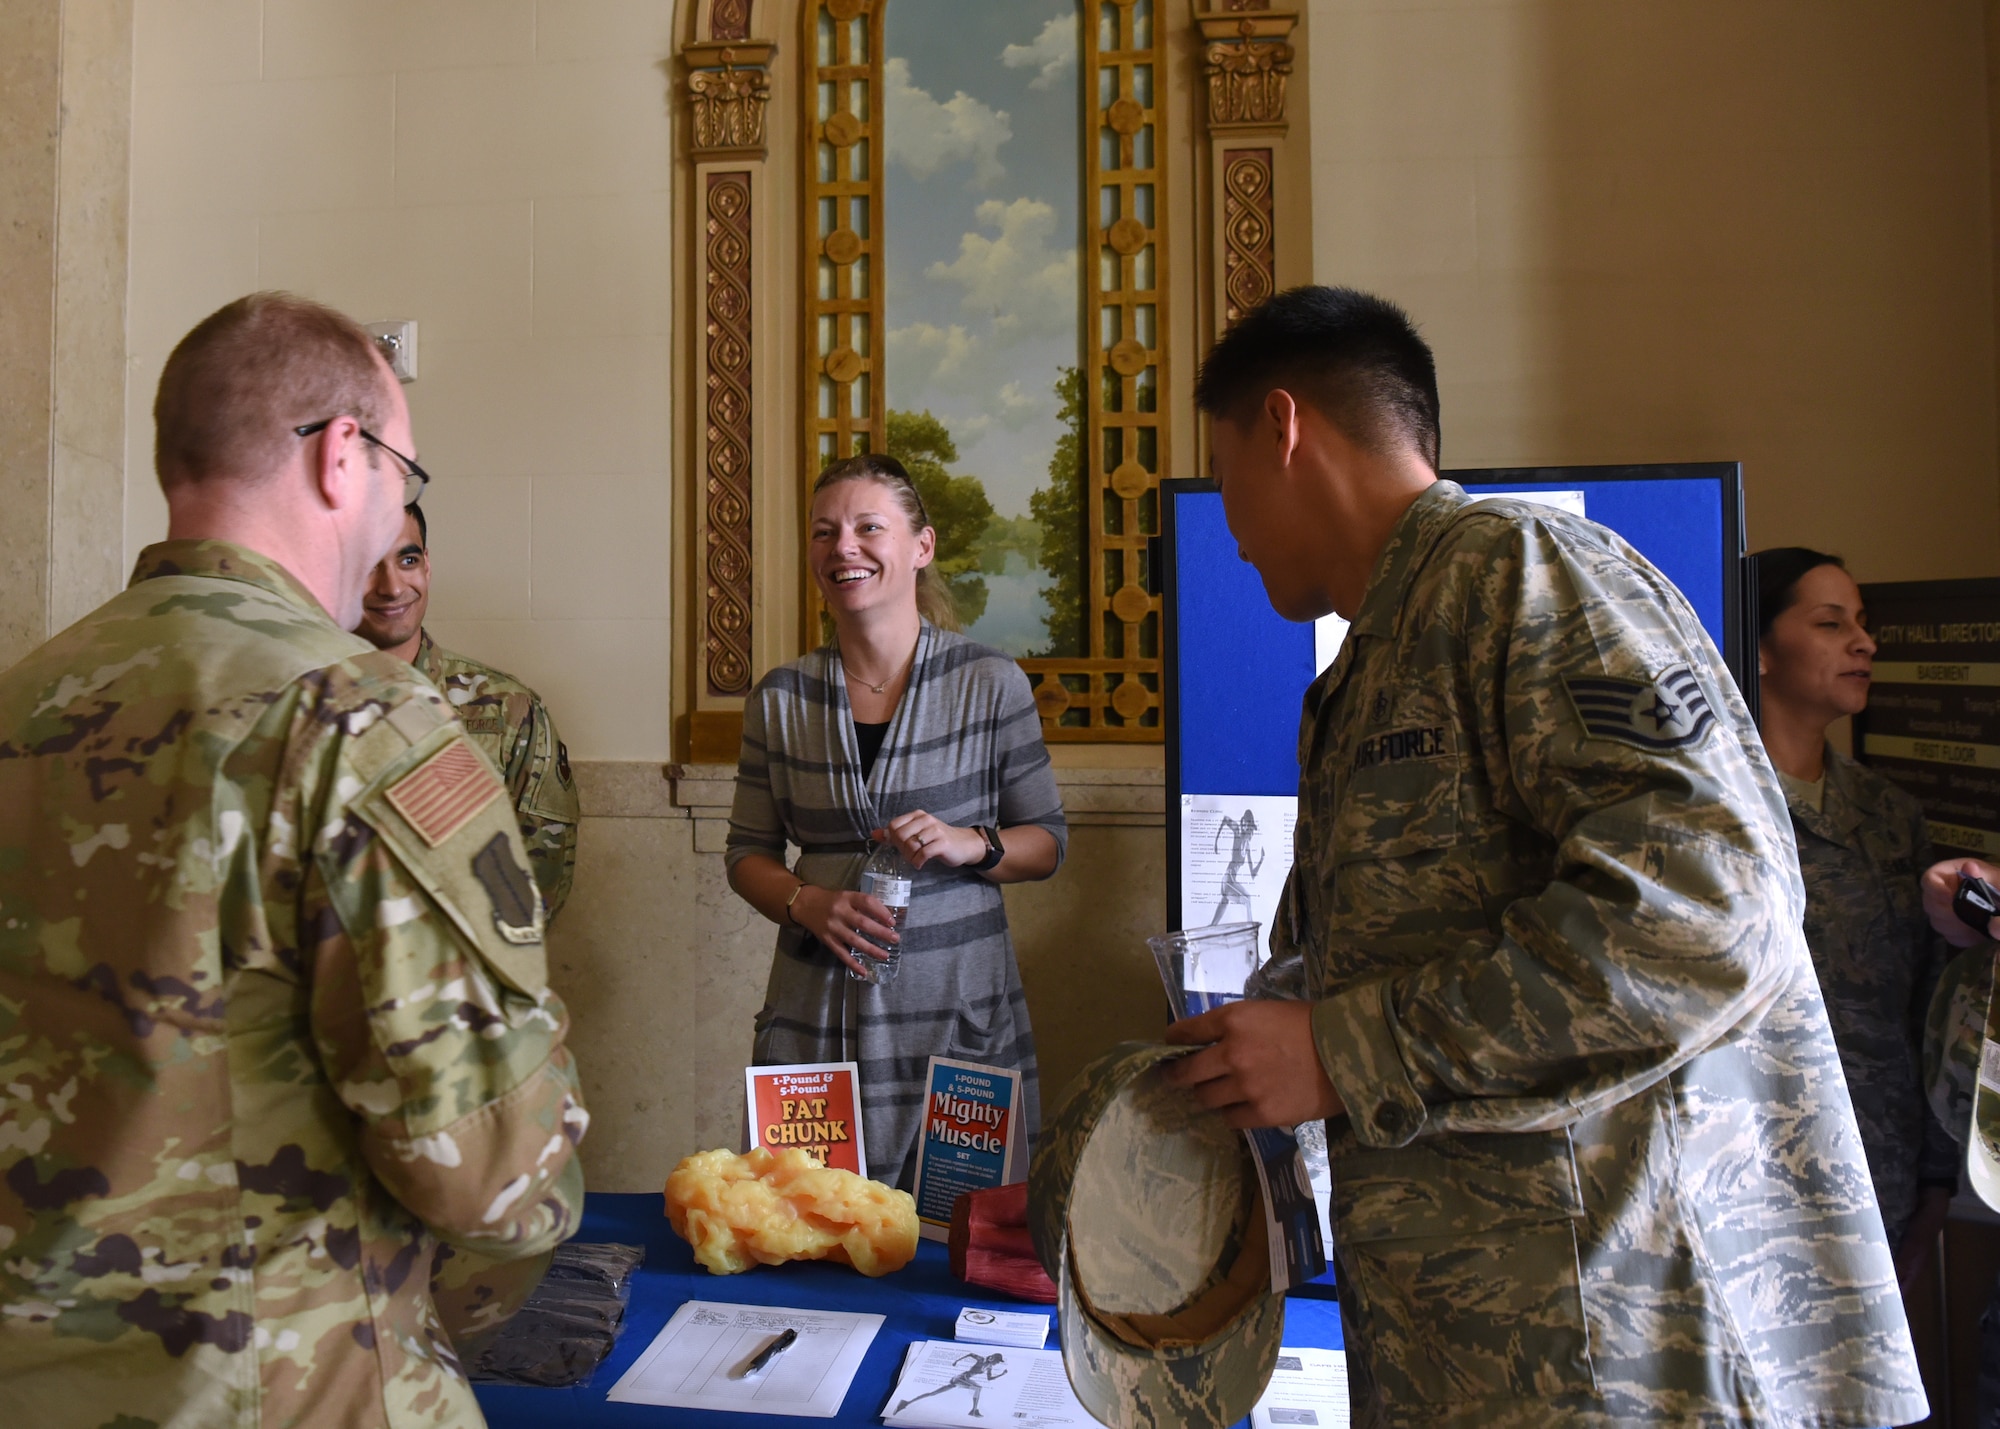 U.S. Air Force 17th Medical Group Health Promotion Coordinator Elizabeth Burmeister, engages with Goodfellow Air Force Base members at an information booth before a Commander’s Call at the Murphey Performance Hall in San Angelo, Texas, Jan. 9, 2020. Burmeister encouraged individuals to sign pledges, giving up smoking or other unhealthy habits. (U.S. Air Force photo by Airman 1st Class Abbey Rieves)